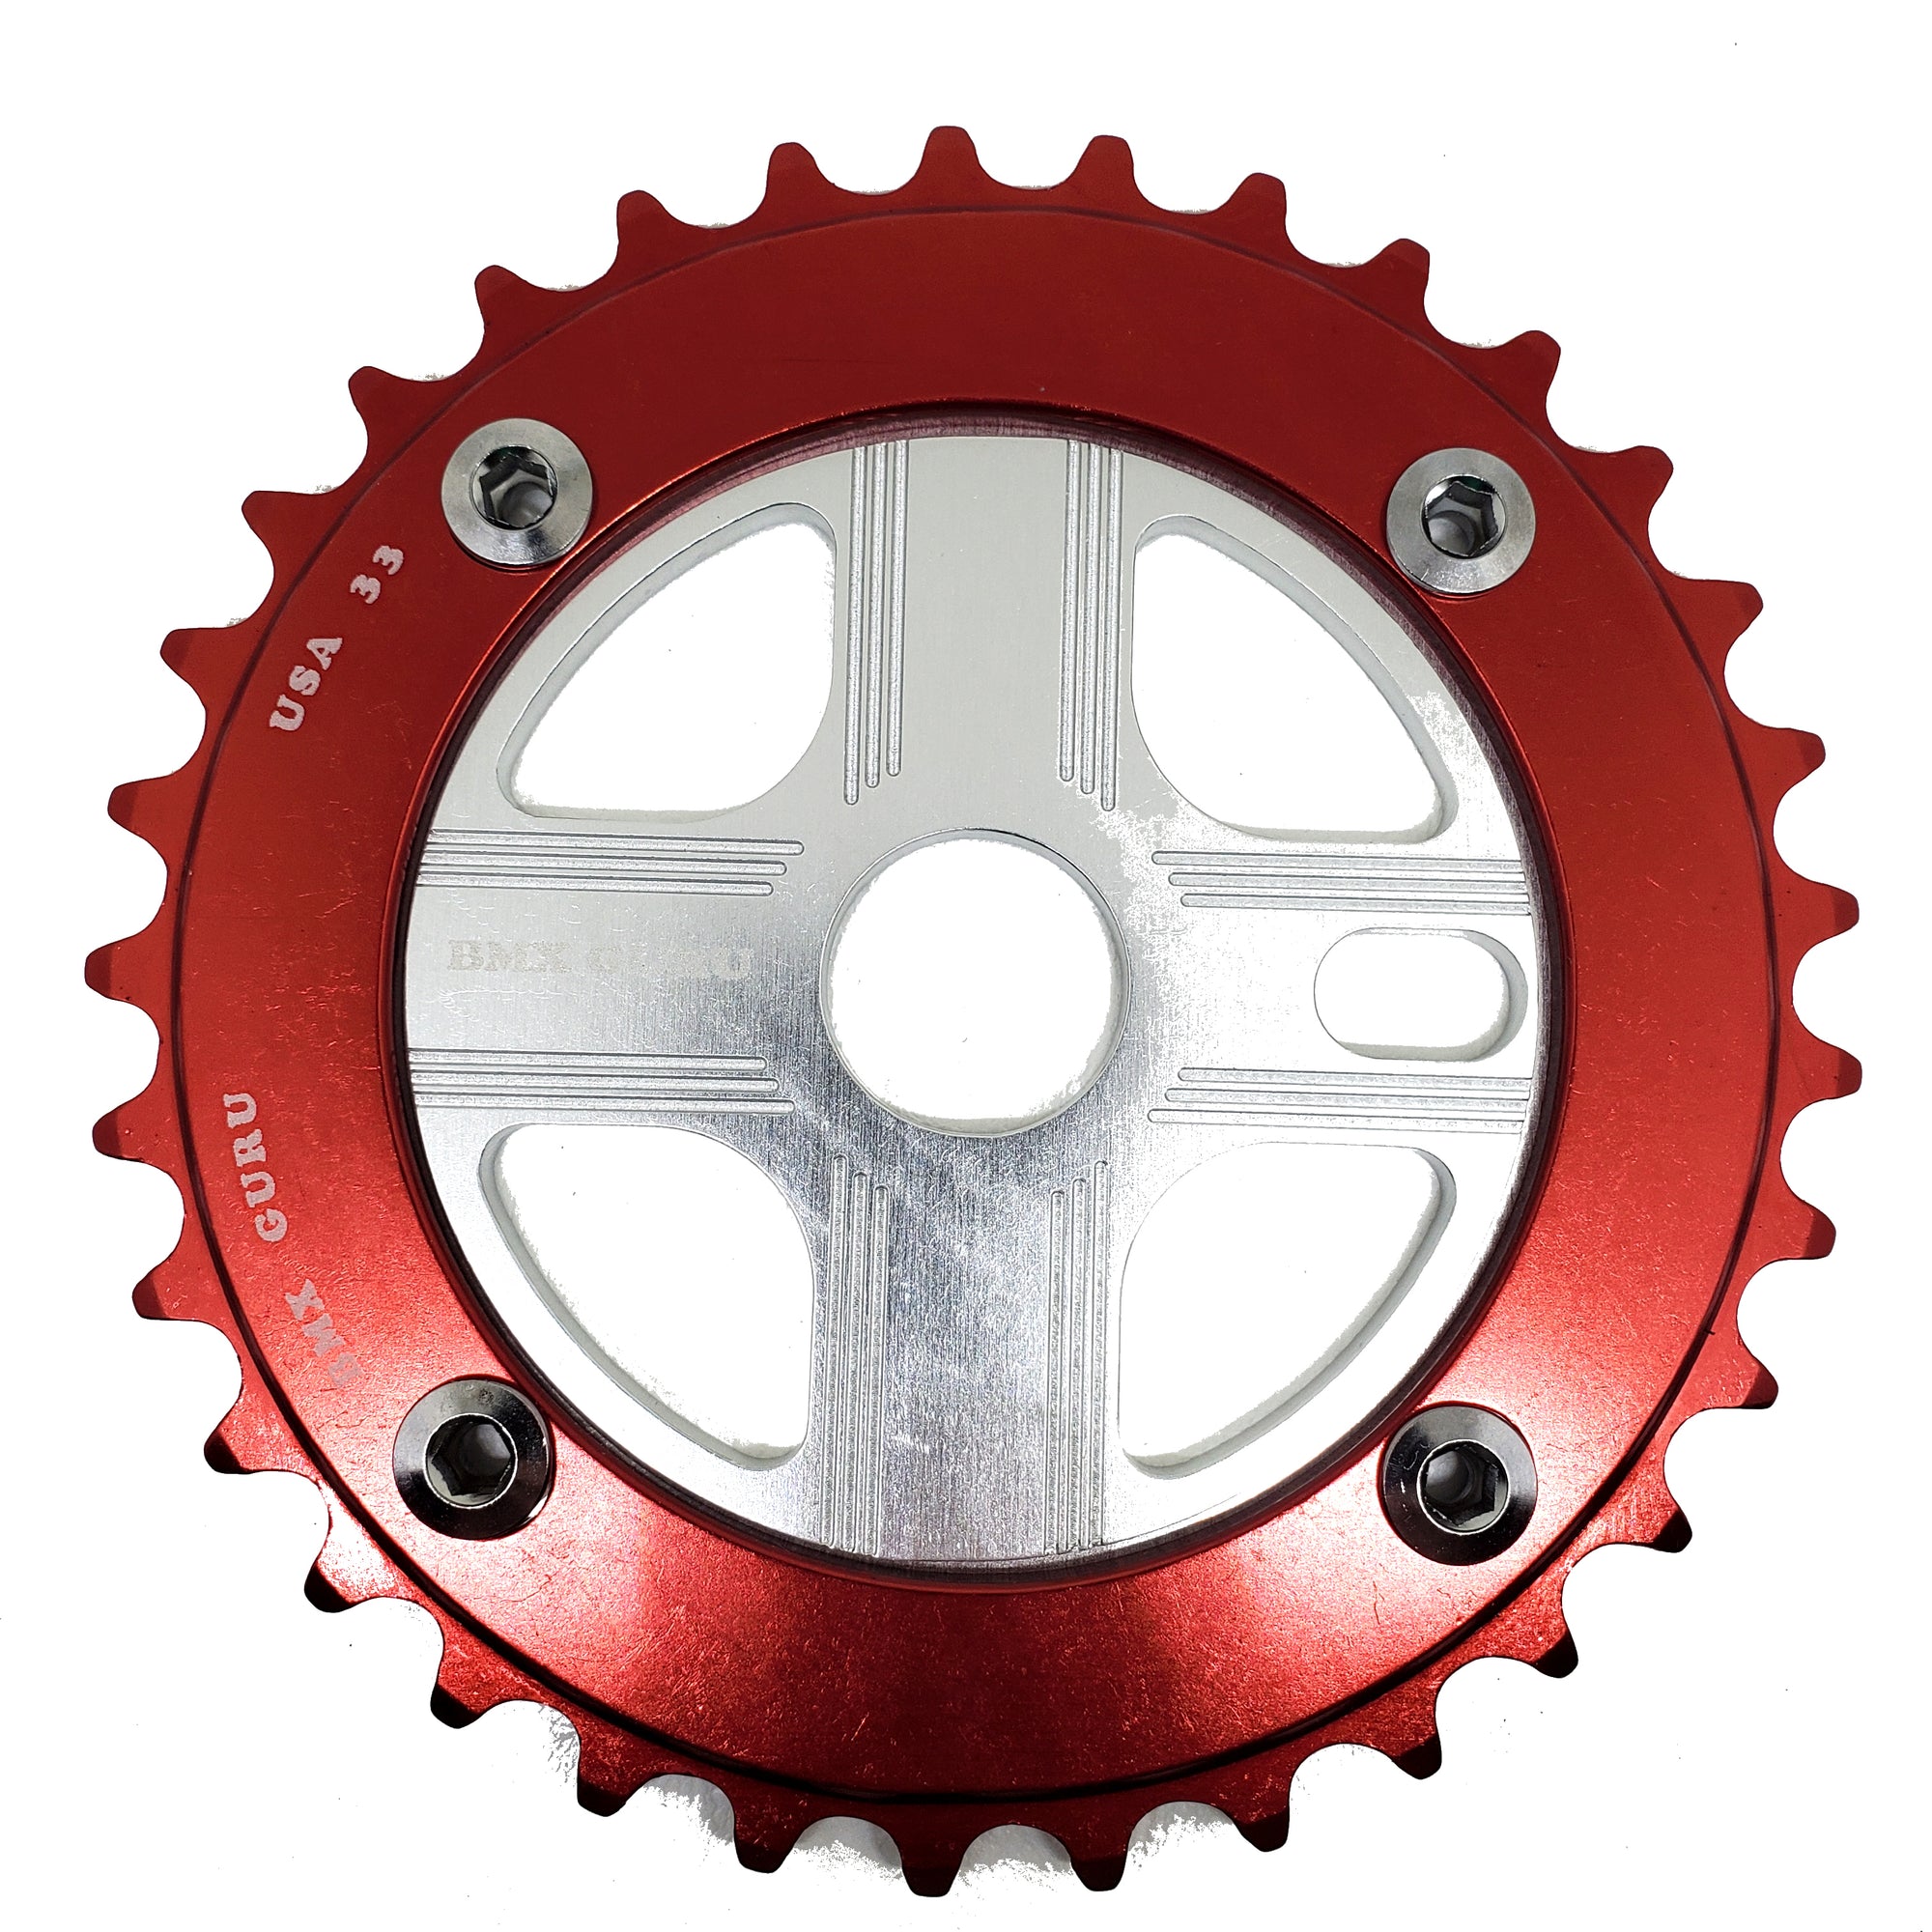 BMXGuru 33T Aluminum Spider & 4-bolt Chainring Combo - Red over Silver - USA Made